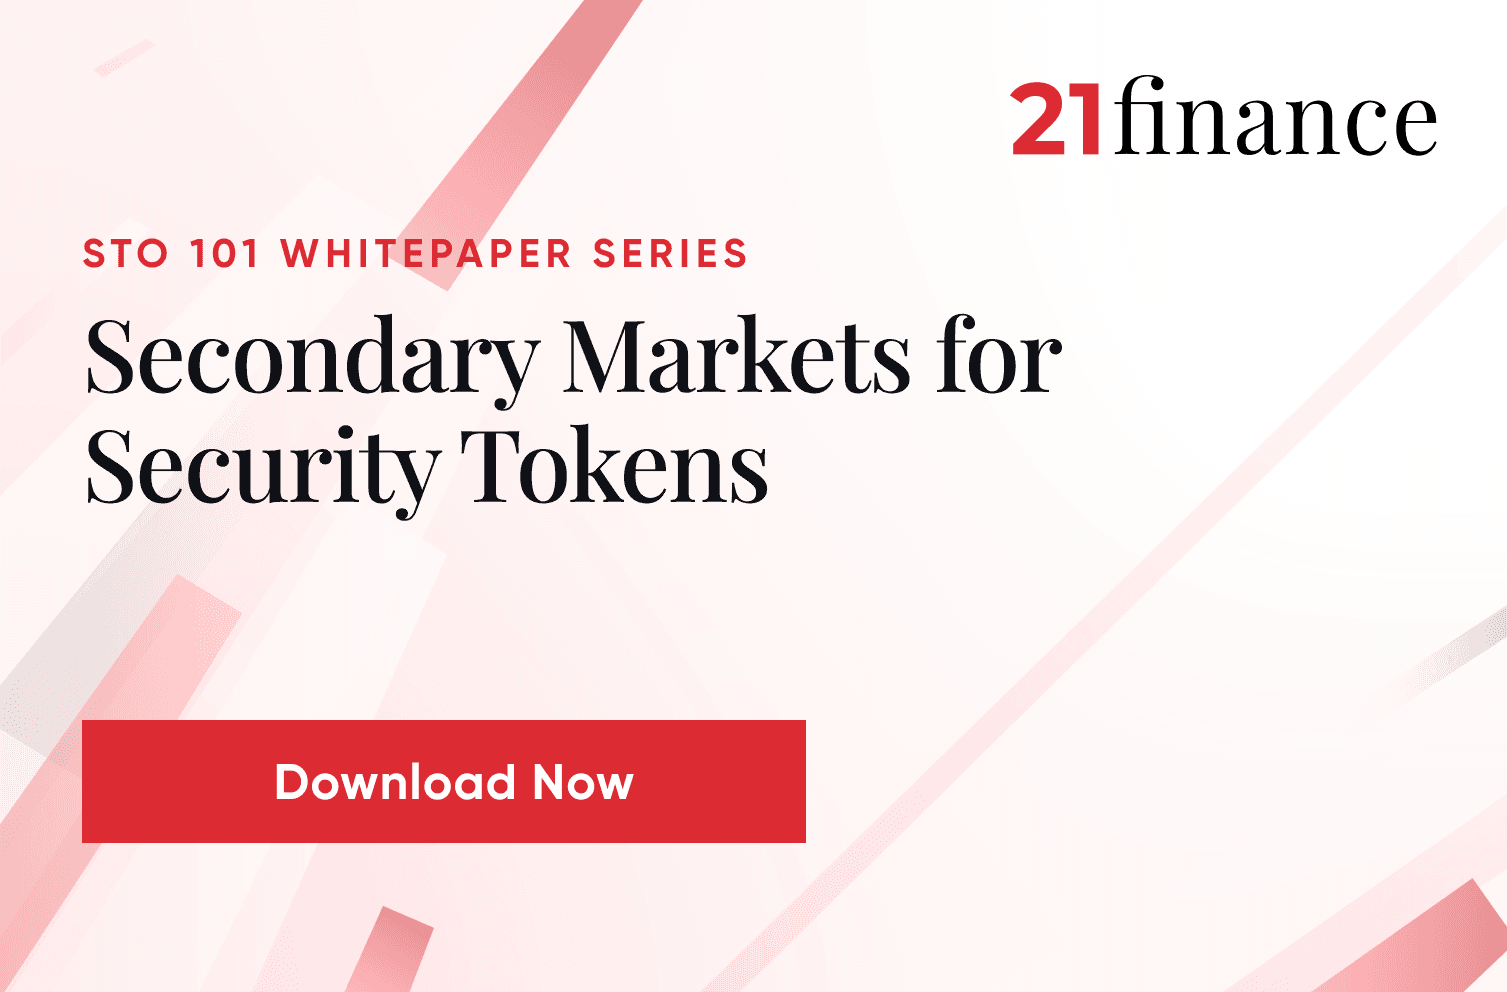 STO whitepaper series from 21finance on the topic of secondary markets for Security Token Offerings